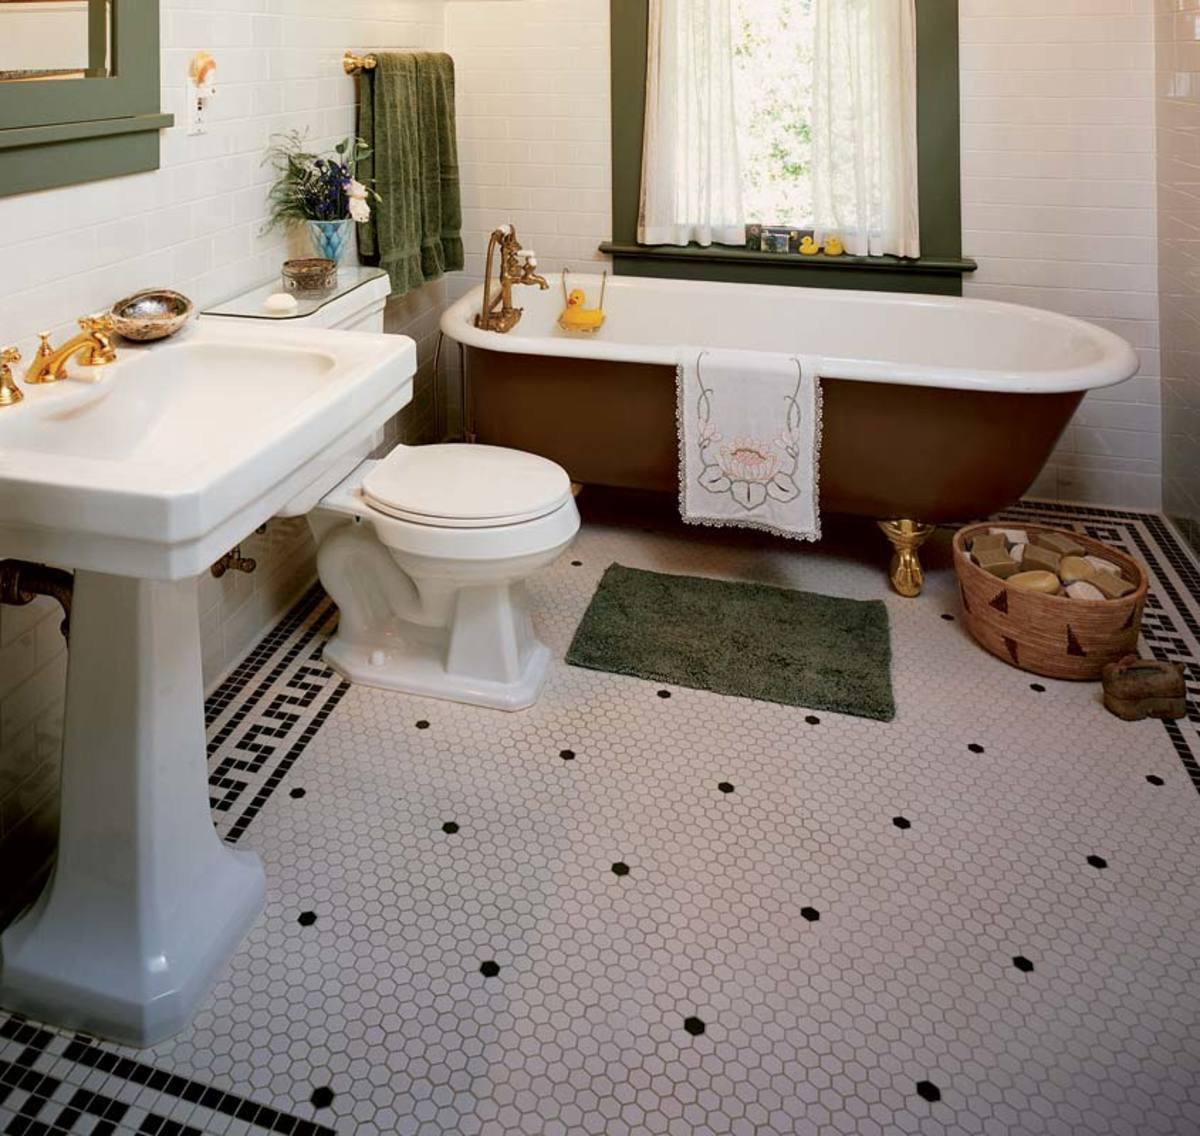 Hex Bathroom Floor Tile
 The Floor is a Key to Style Arts & Crafts Homes and the